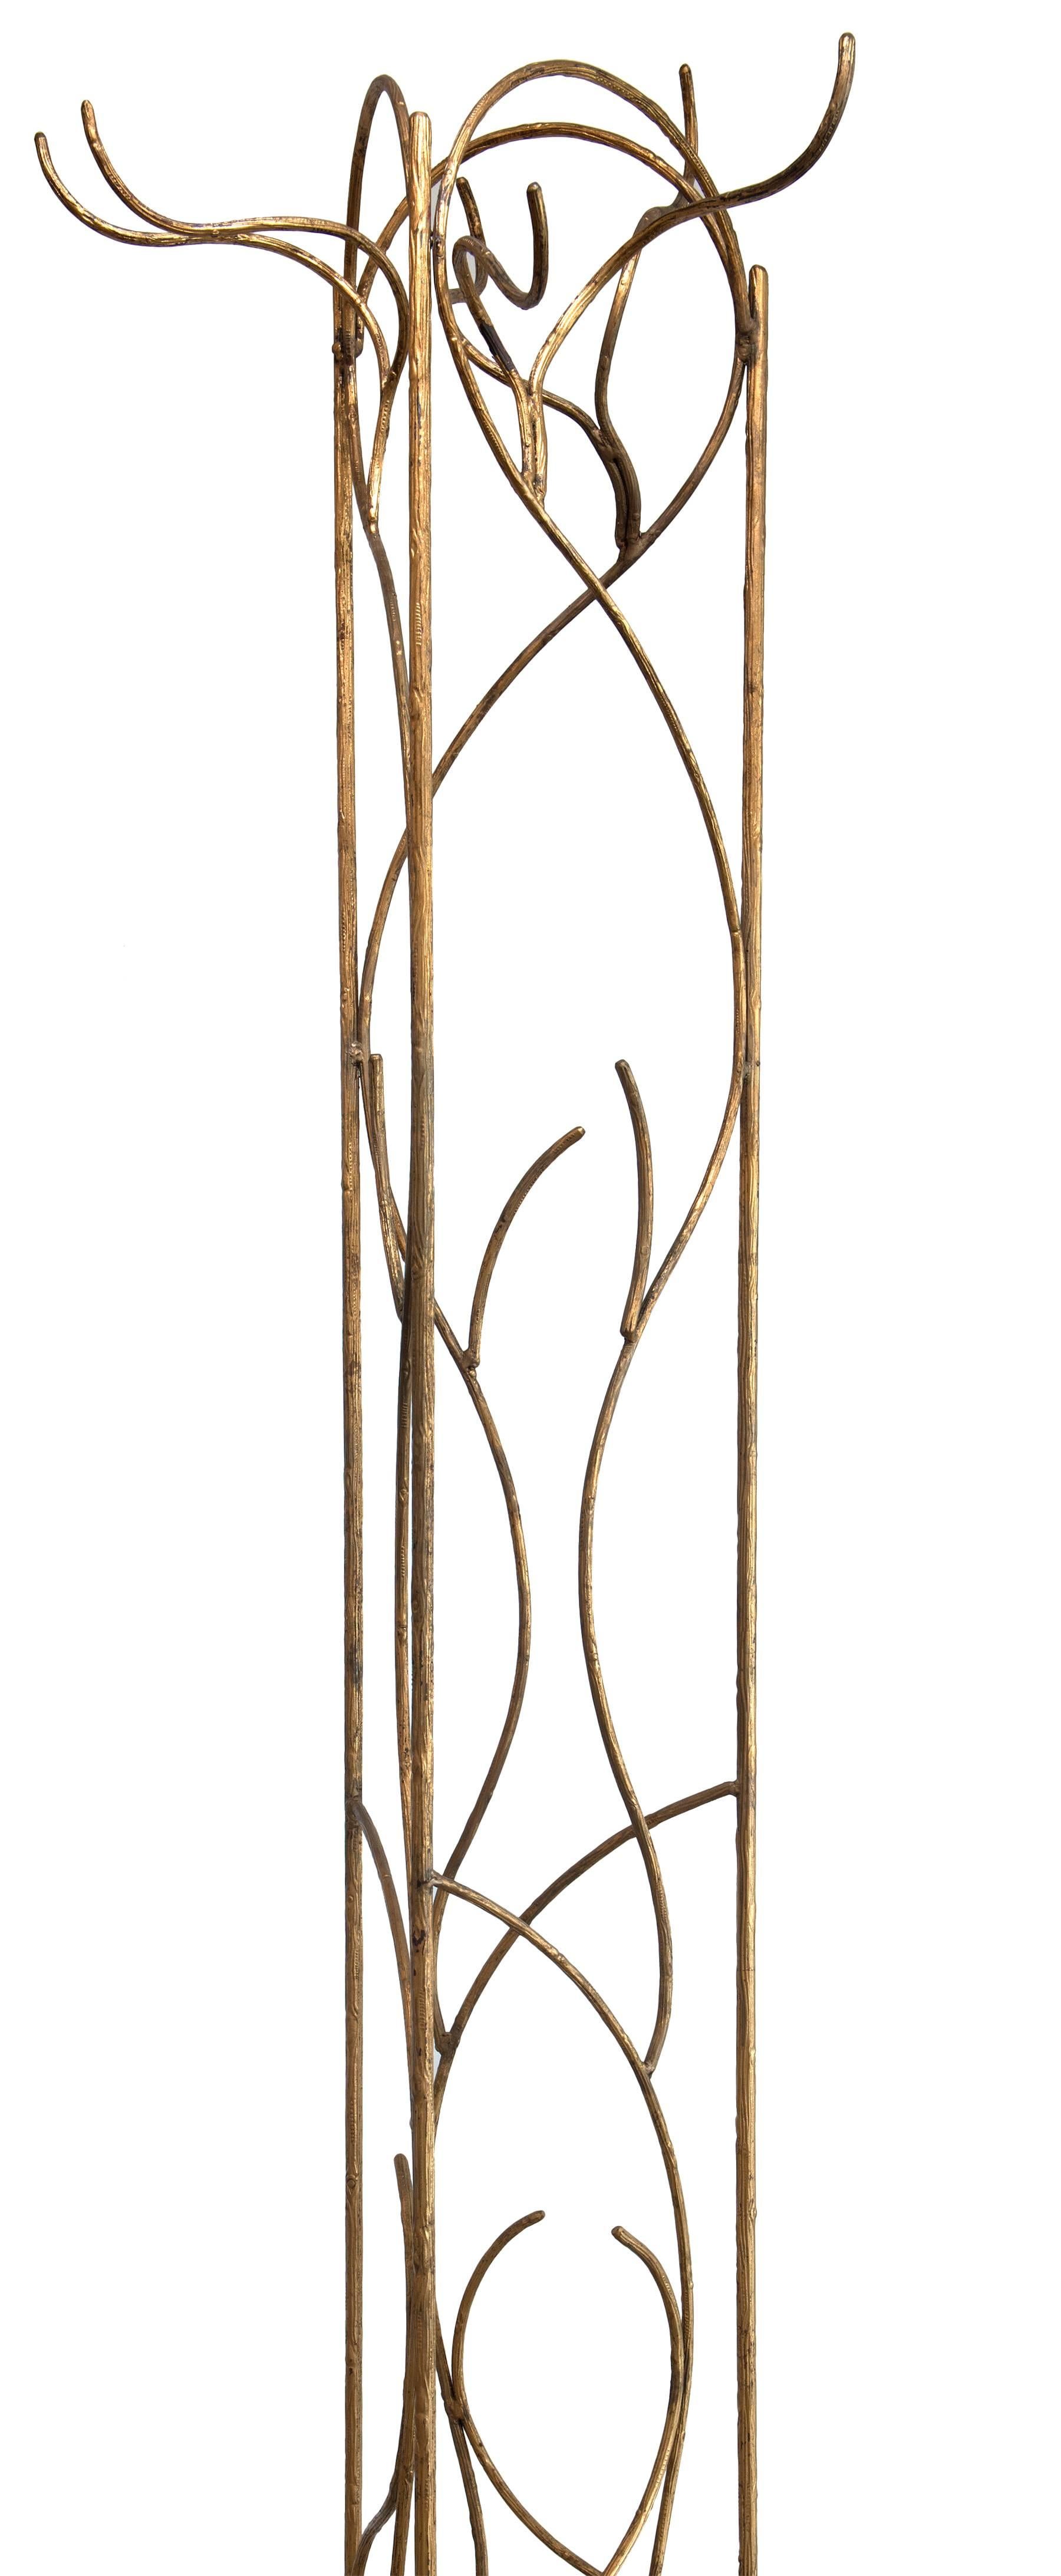 Pair of vintage wrought iron and gold leafed store displays. Tooled detail to simulate wood branches. They each stand sturdily on their own. Would make a great coat rack system for a dressing room or an architectural detail.

1. 86" x